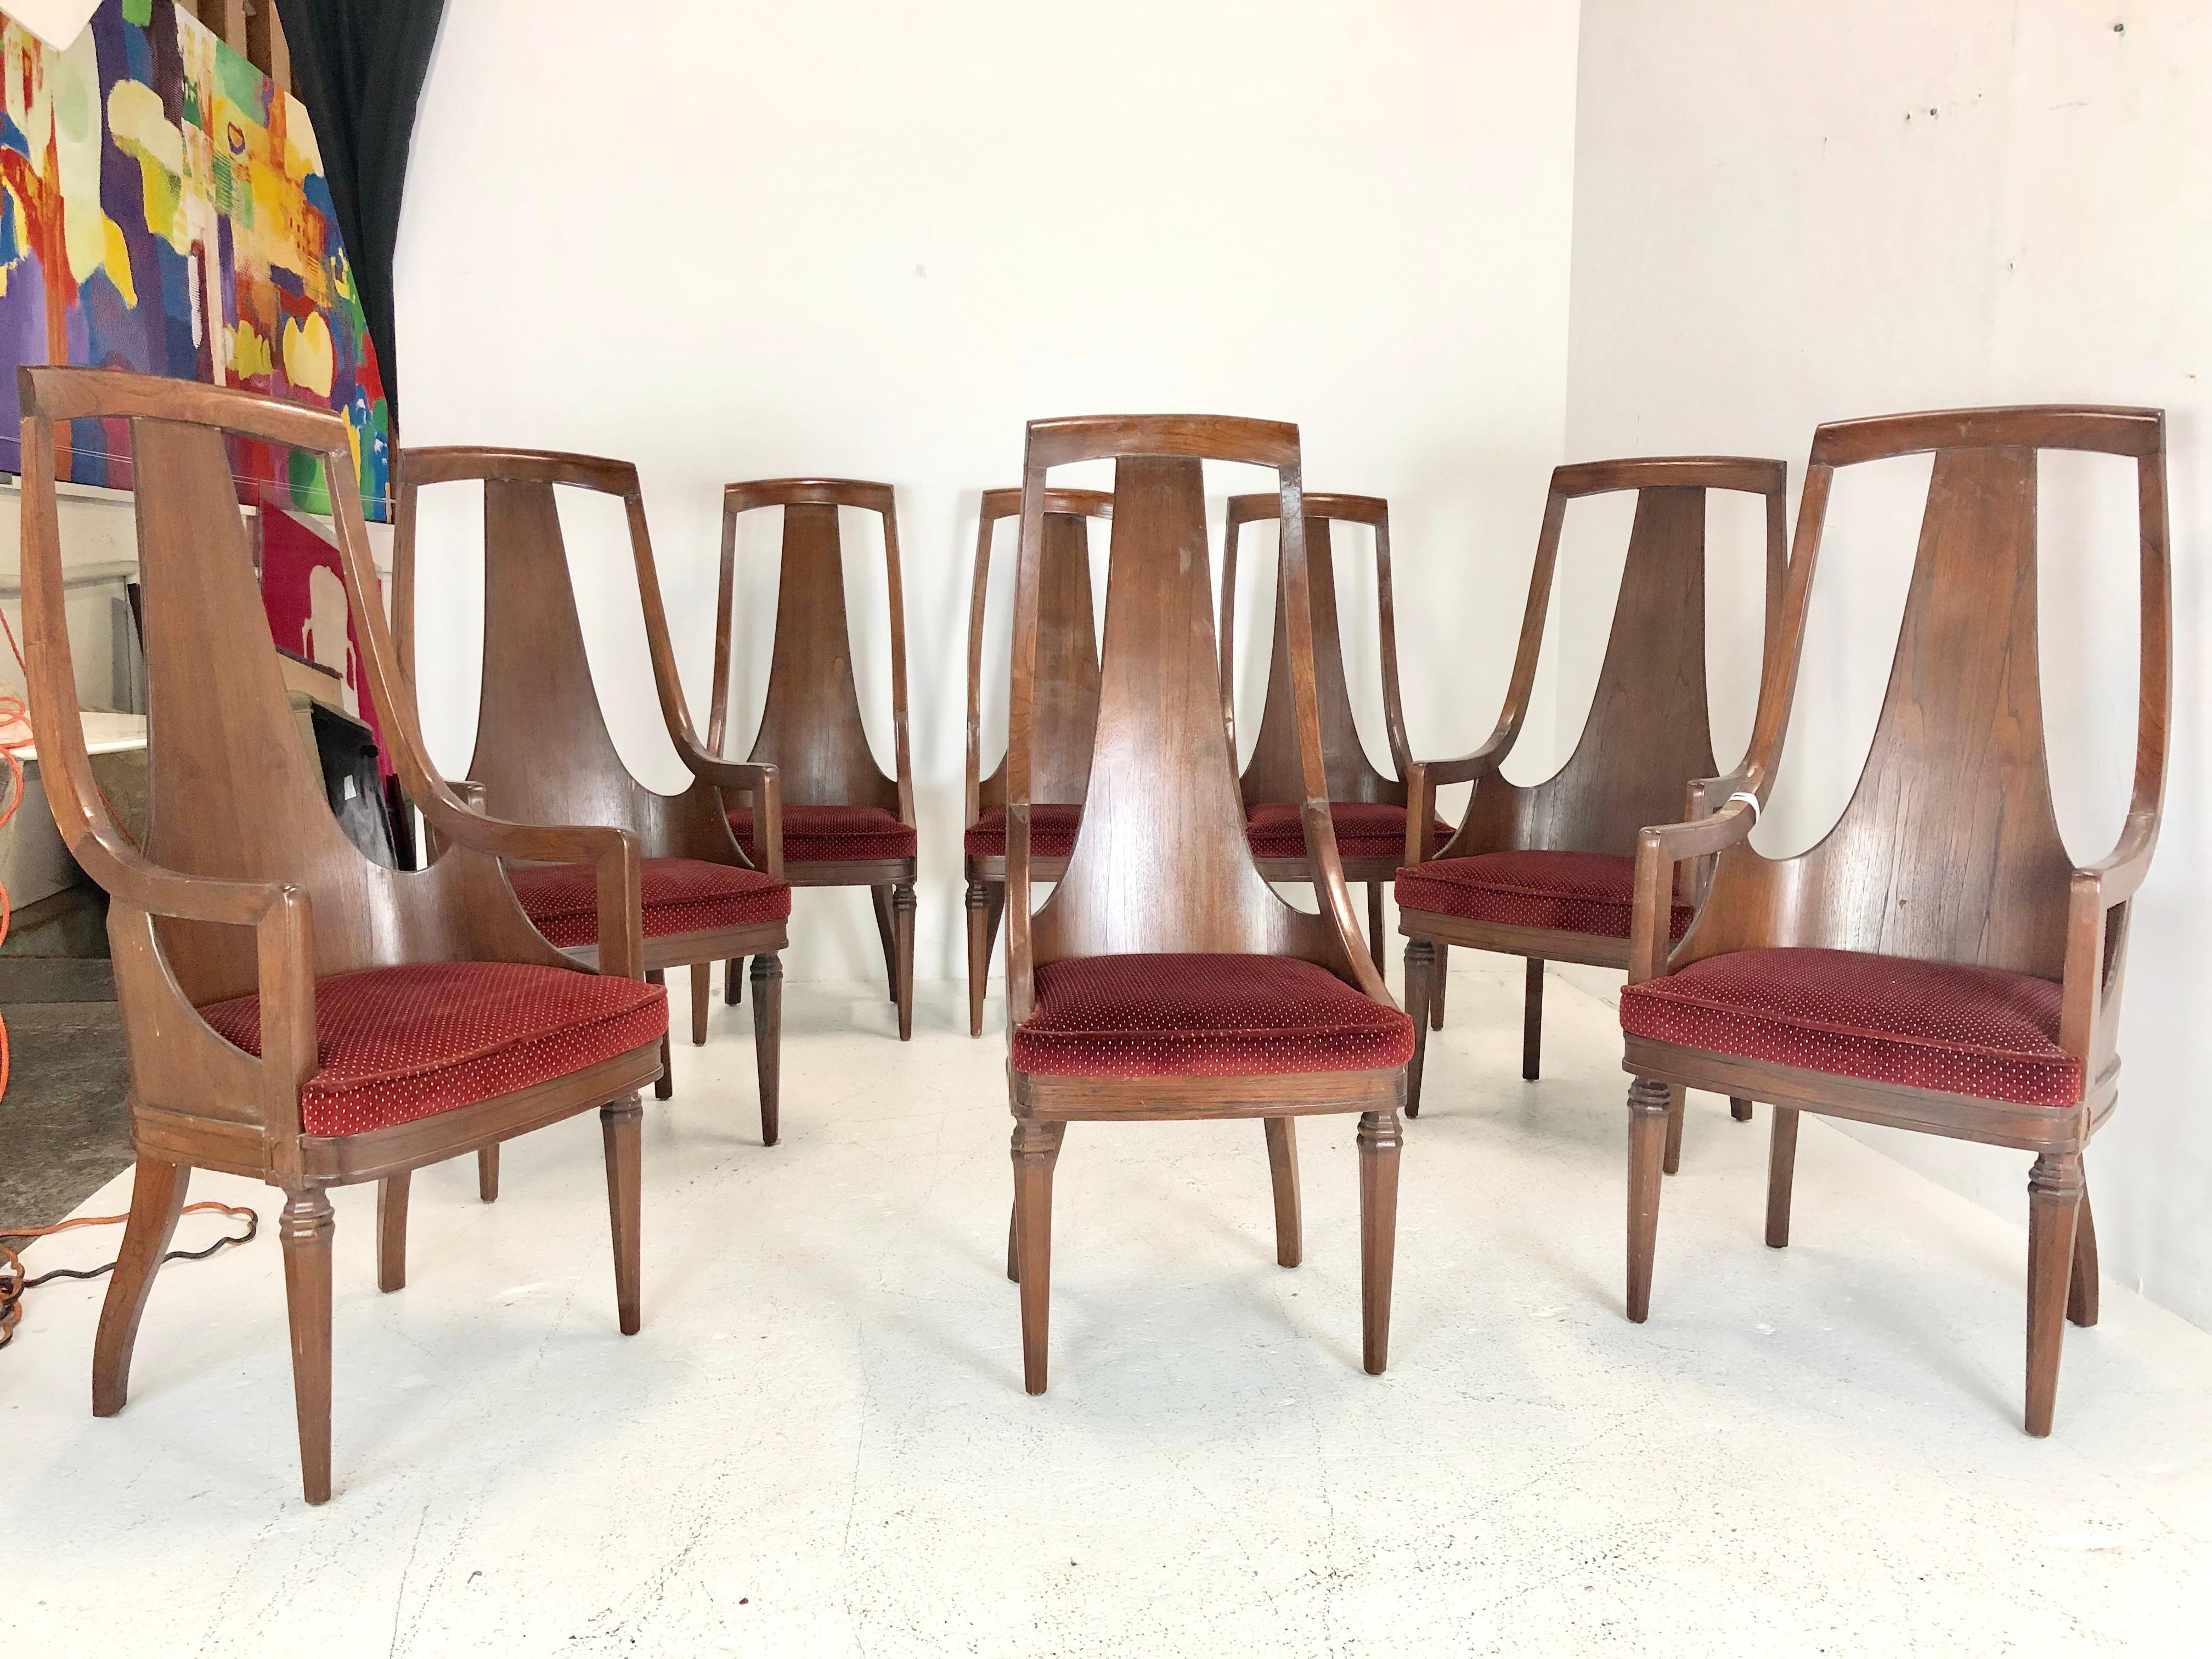 Set of 4 tall back walnut armchairs. These chairs have been re-glued and need refinishing.

See our other listing with 4 side dining chairs

Dimensions;
Armchairs 21